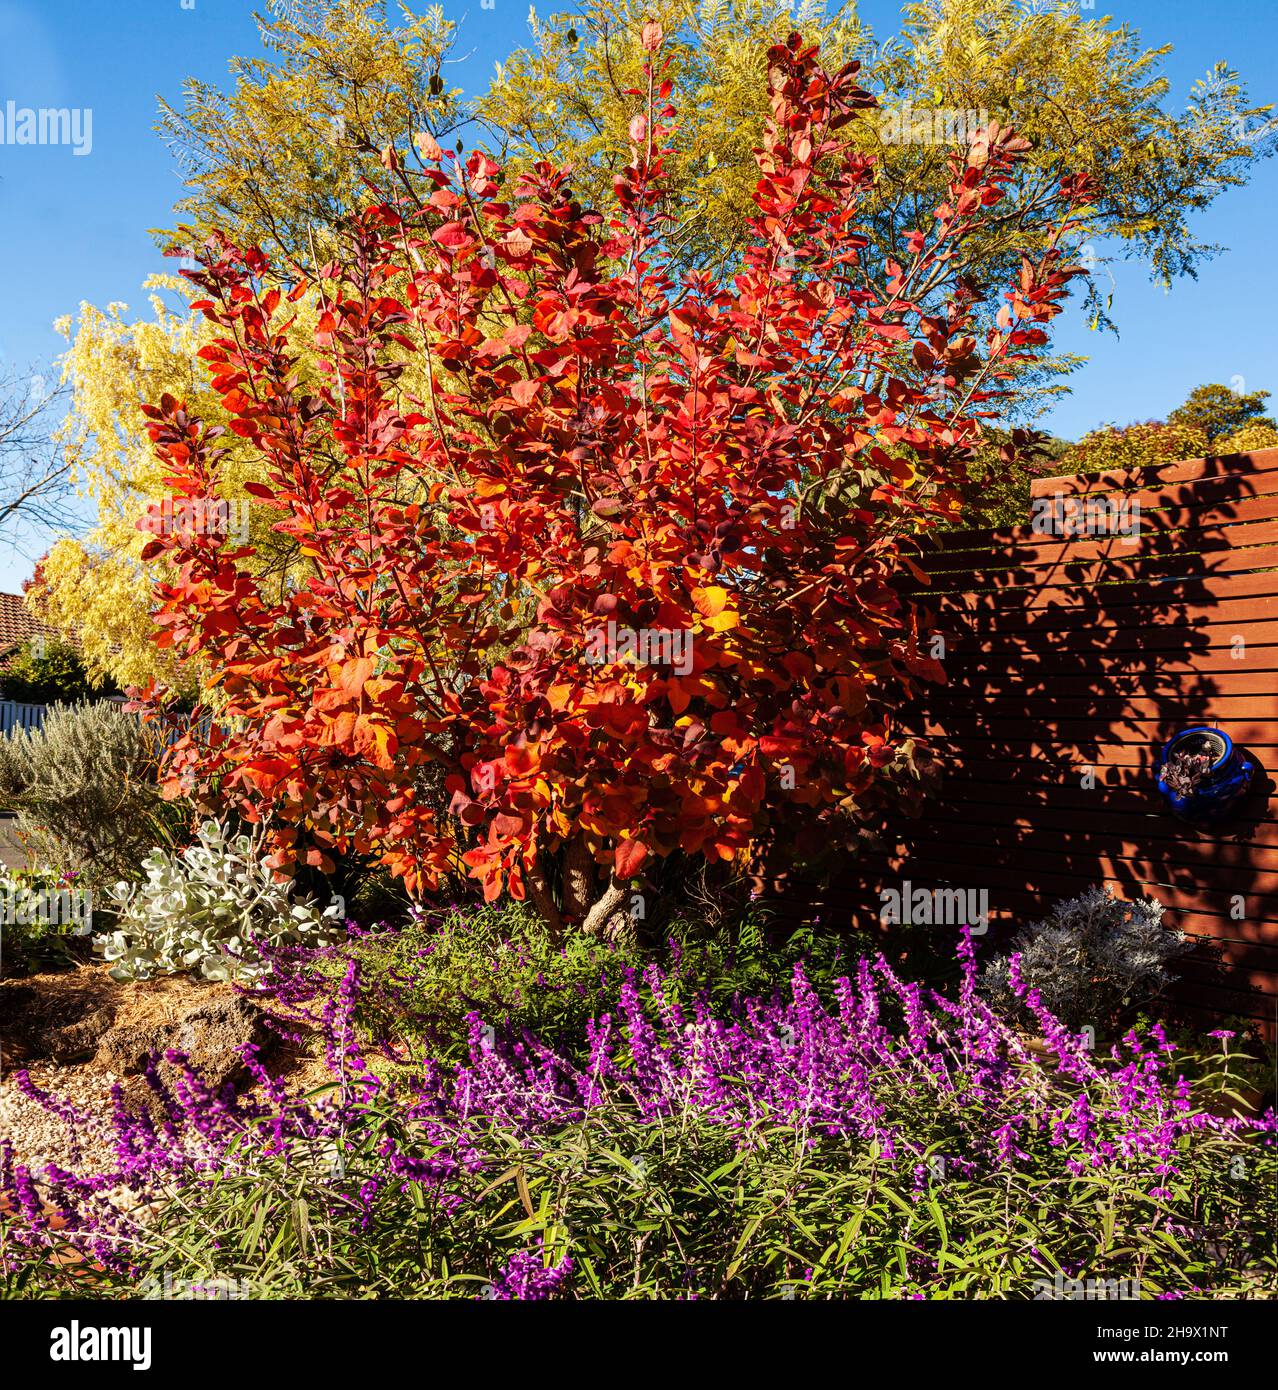 Smokebush grace, Cotinus Coggygria with it's autumnal foliage and Salvia Mexican Sage, Salvia luecantha, is a feature in this suburban garden. Stock Photo